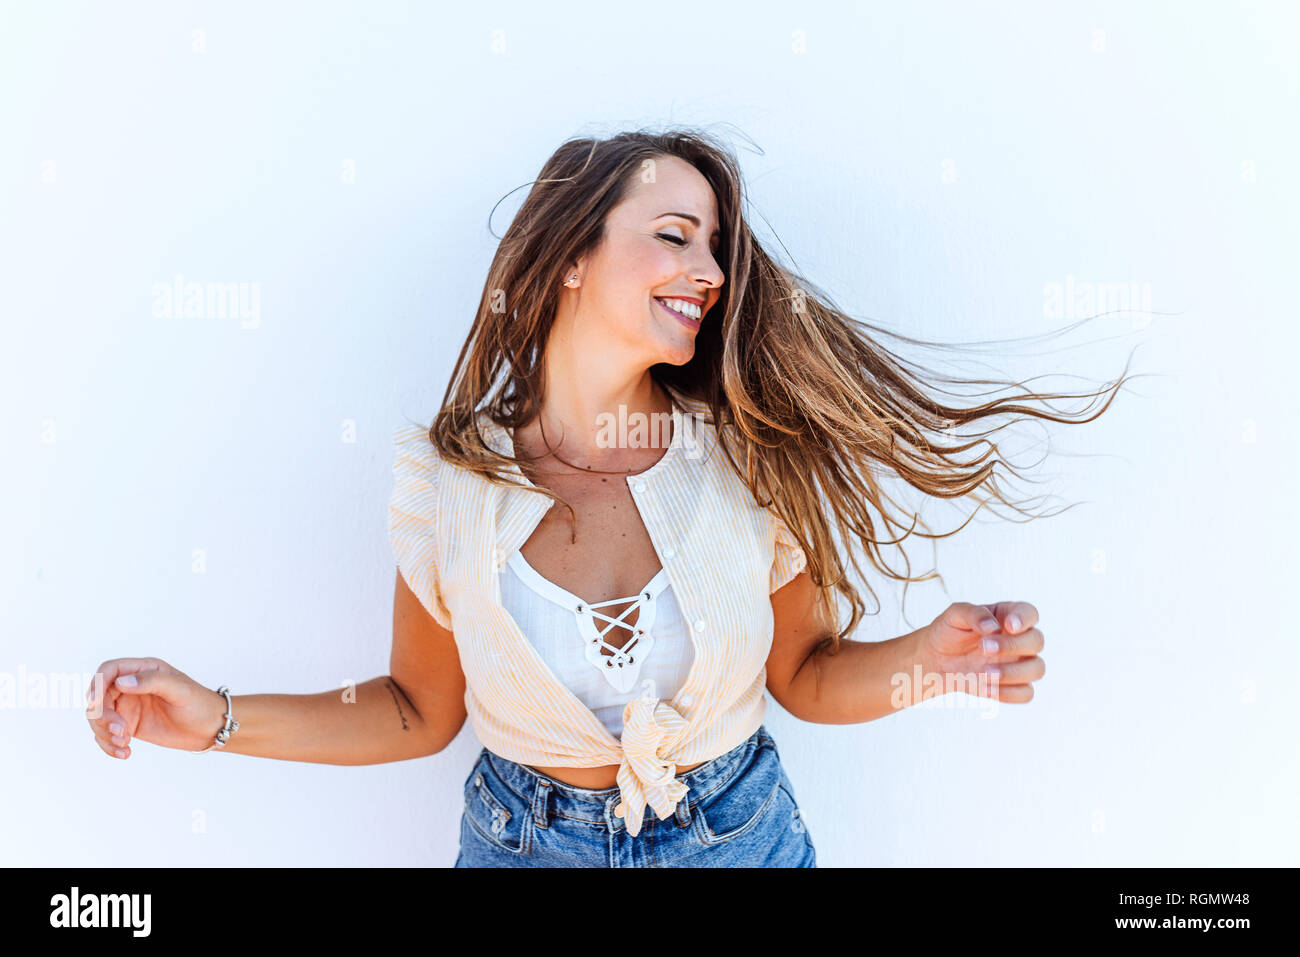 Happy young woman shaking her hair in front of white wall Stock Photo